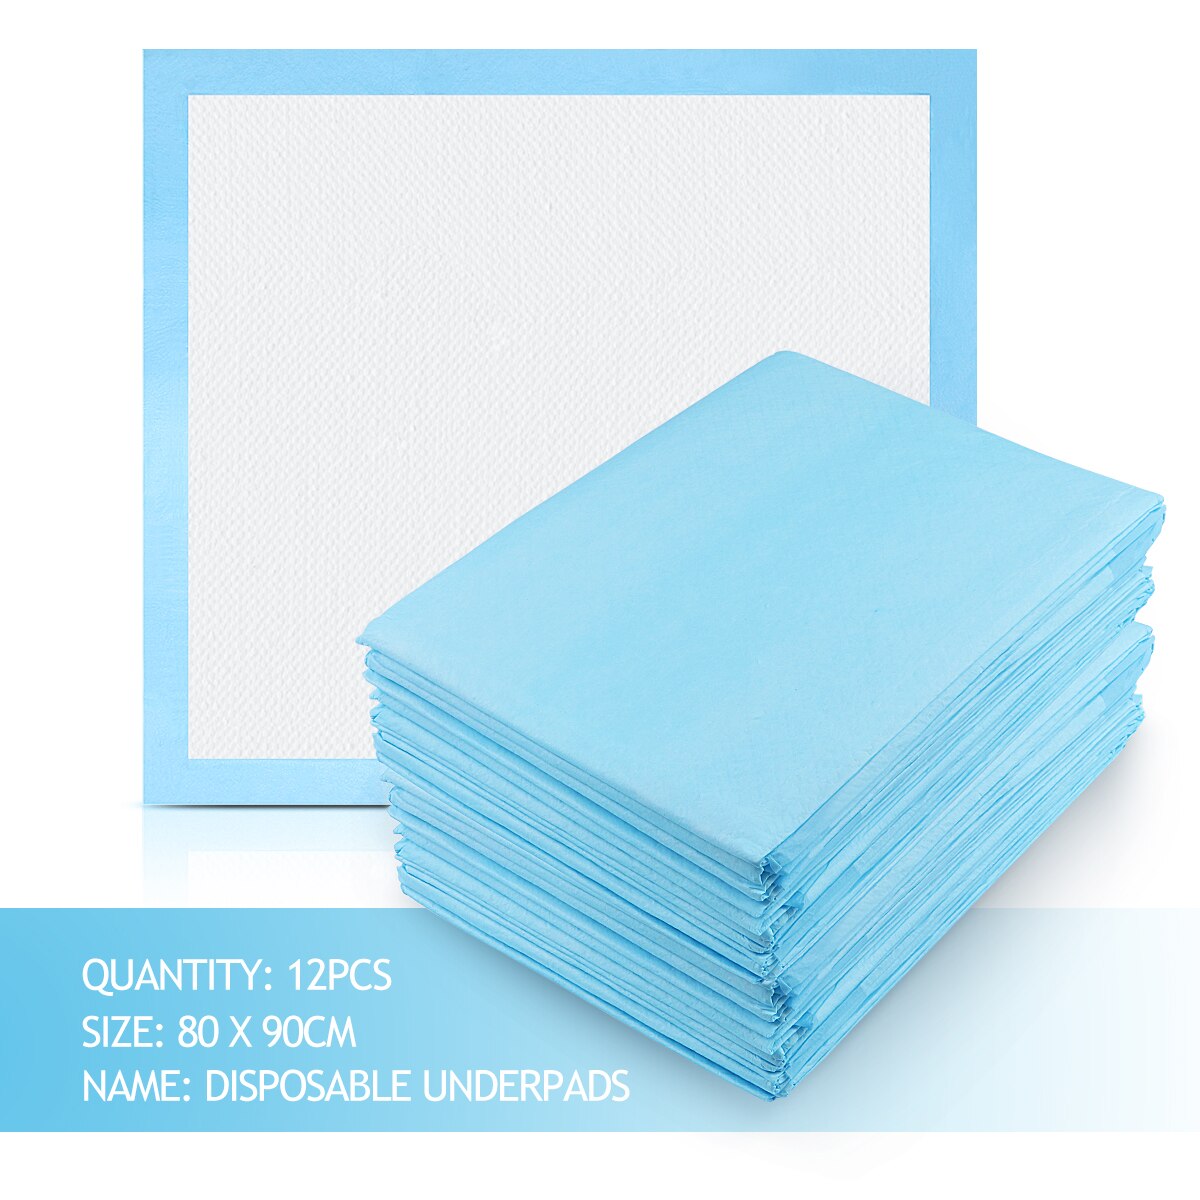 12PCS Disposable Incontinence Pads Bed Pads For Babies Hospital Health Care Tools For Personal Care